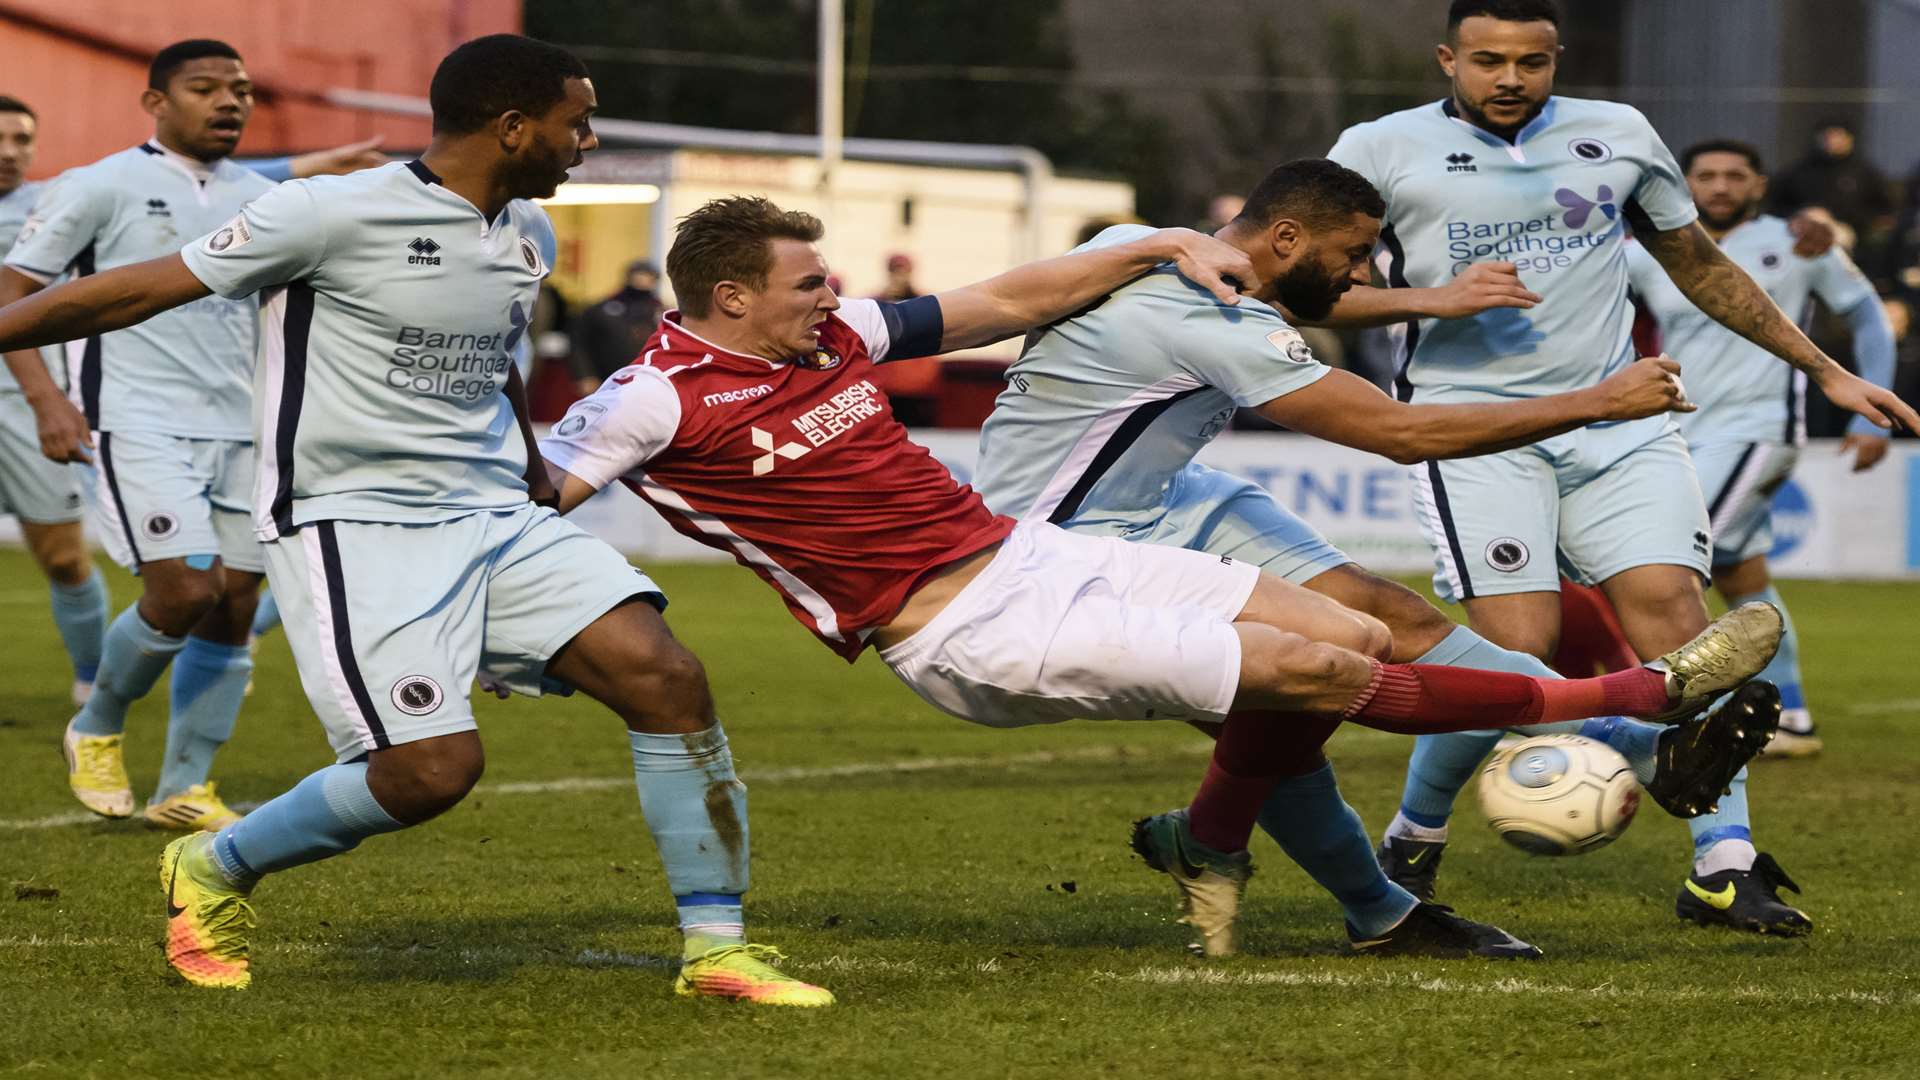 There's no way through for Ebbsfleet captain Dave Winfield Picture: Andy Payton